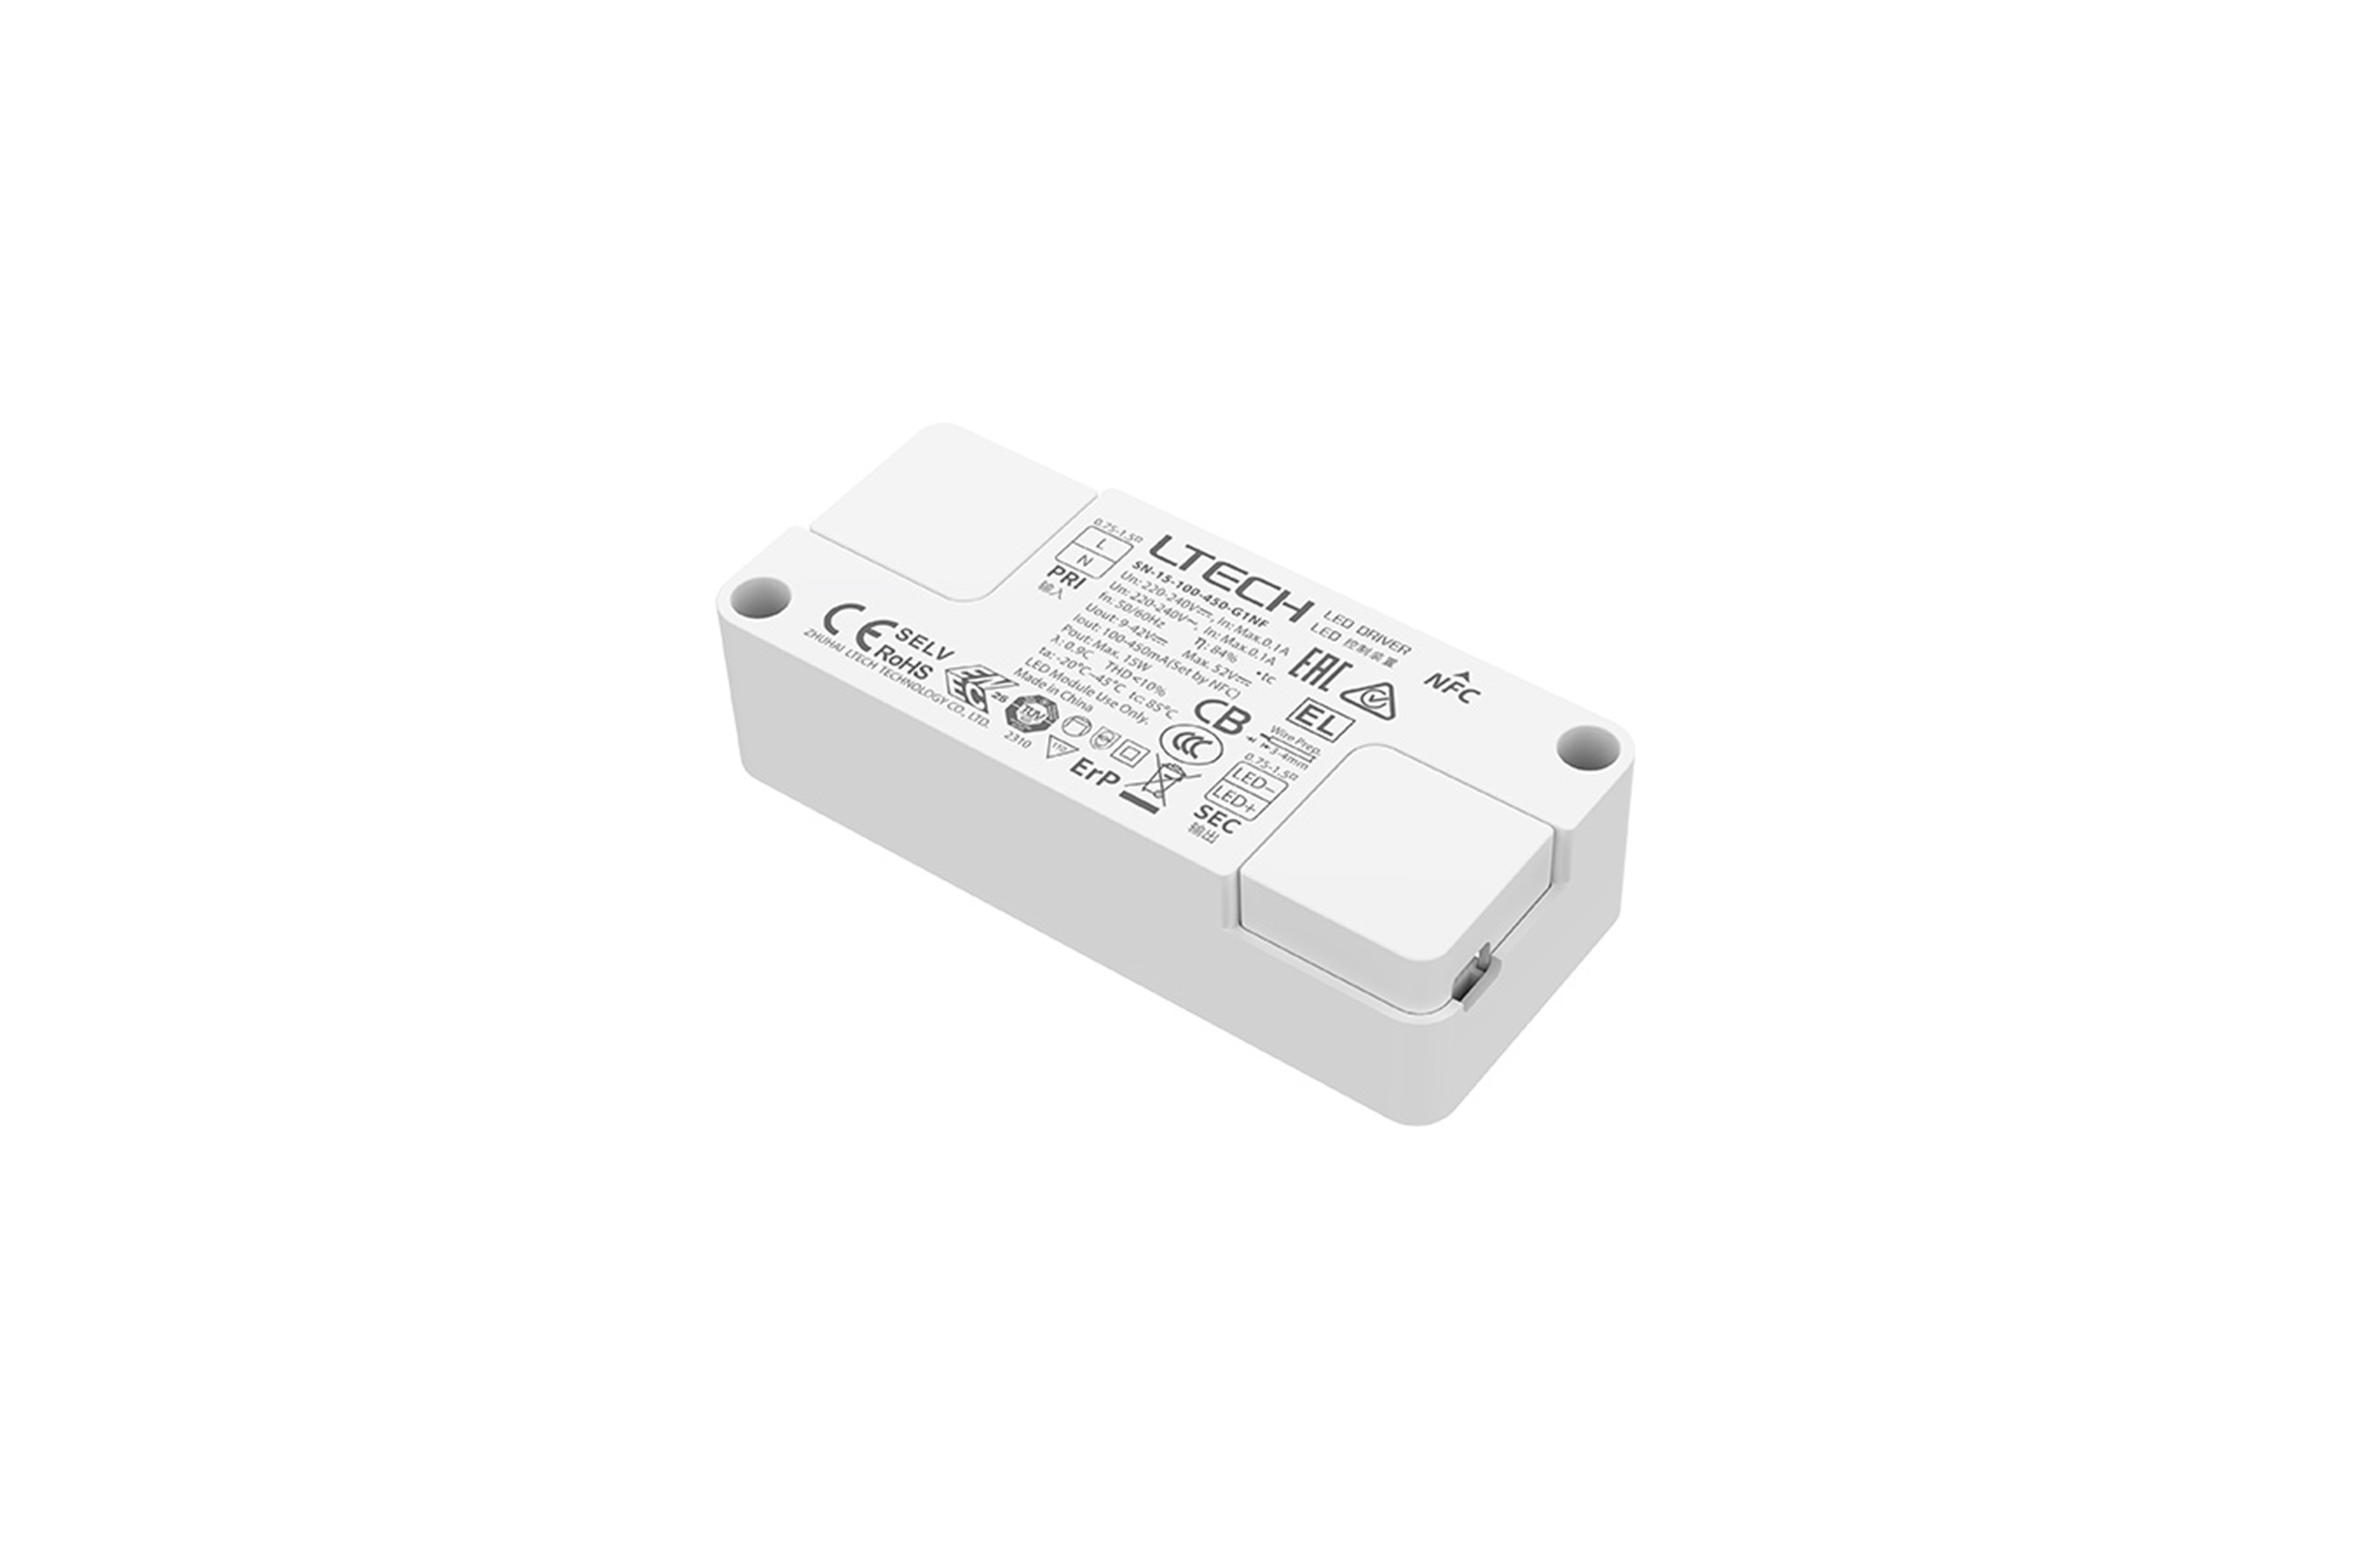 SN-15-100-450-G1NF  Intelligent Constant Current NFC ON/OFF LED Driver, 15W 100-450mA ,9-42Vdc , 200-240Vac, Out put Range.0.9W-15W, IP20, 5yrs Warrenty.